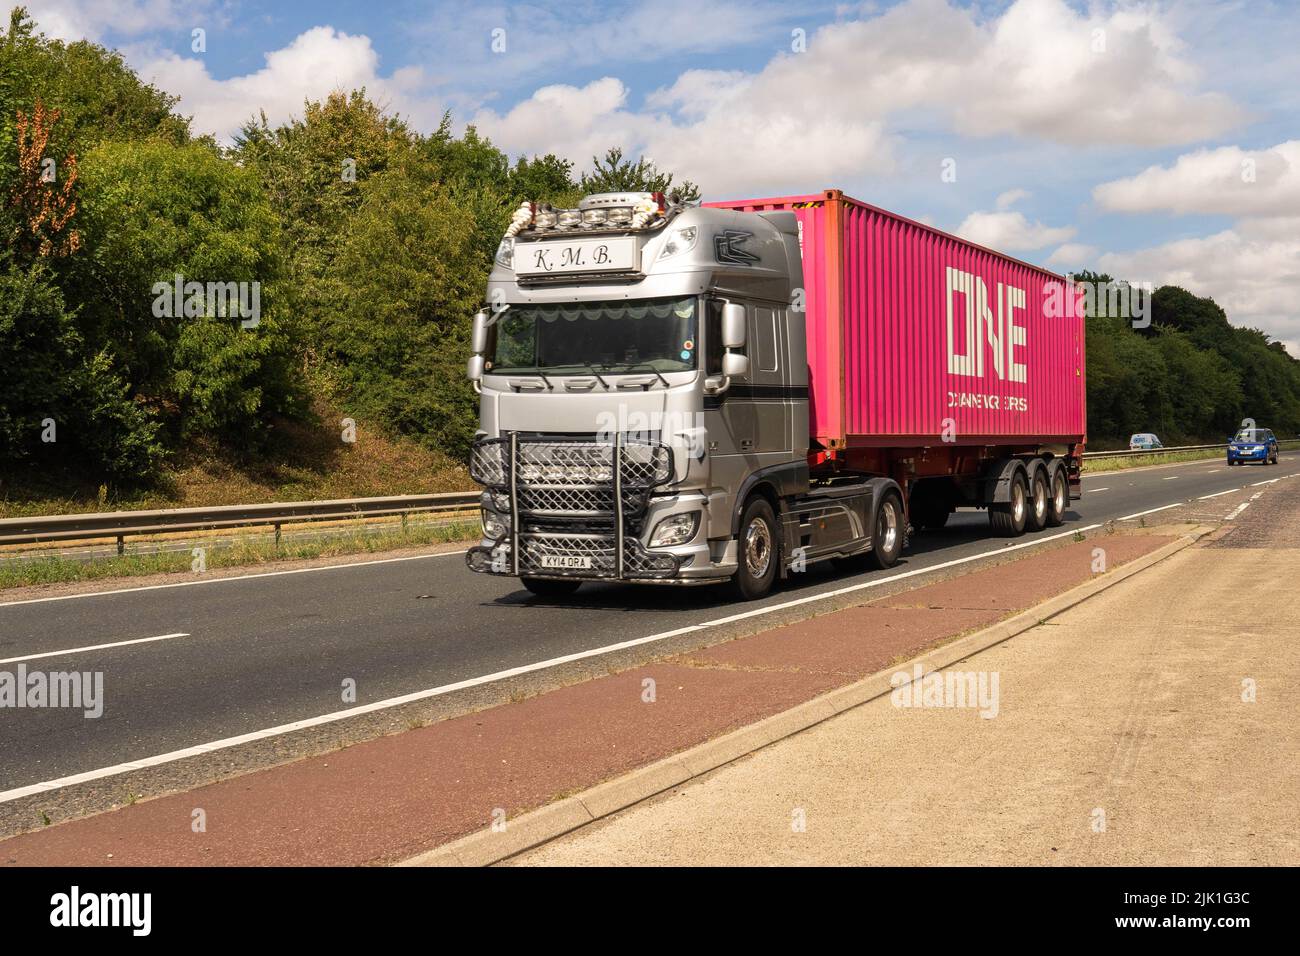 Daf articulated truck carrying a large container on its trailer Stock Photo